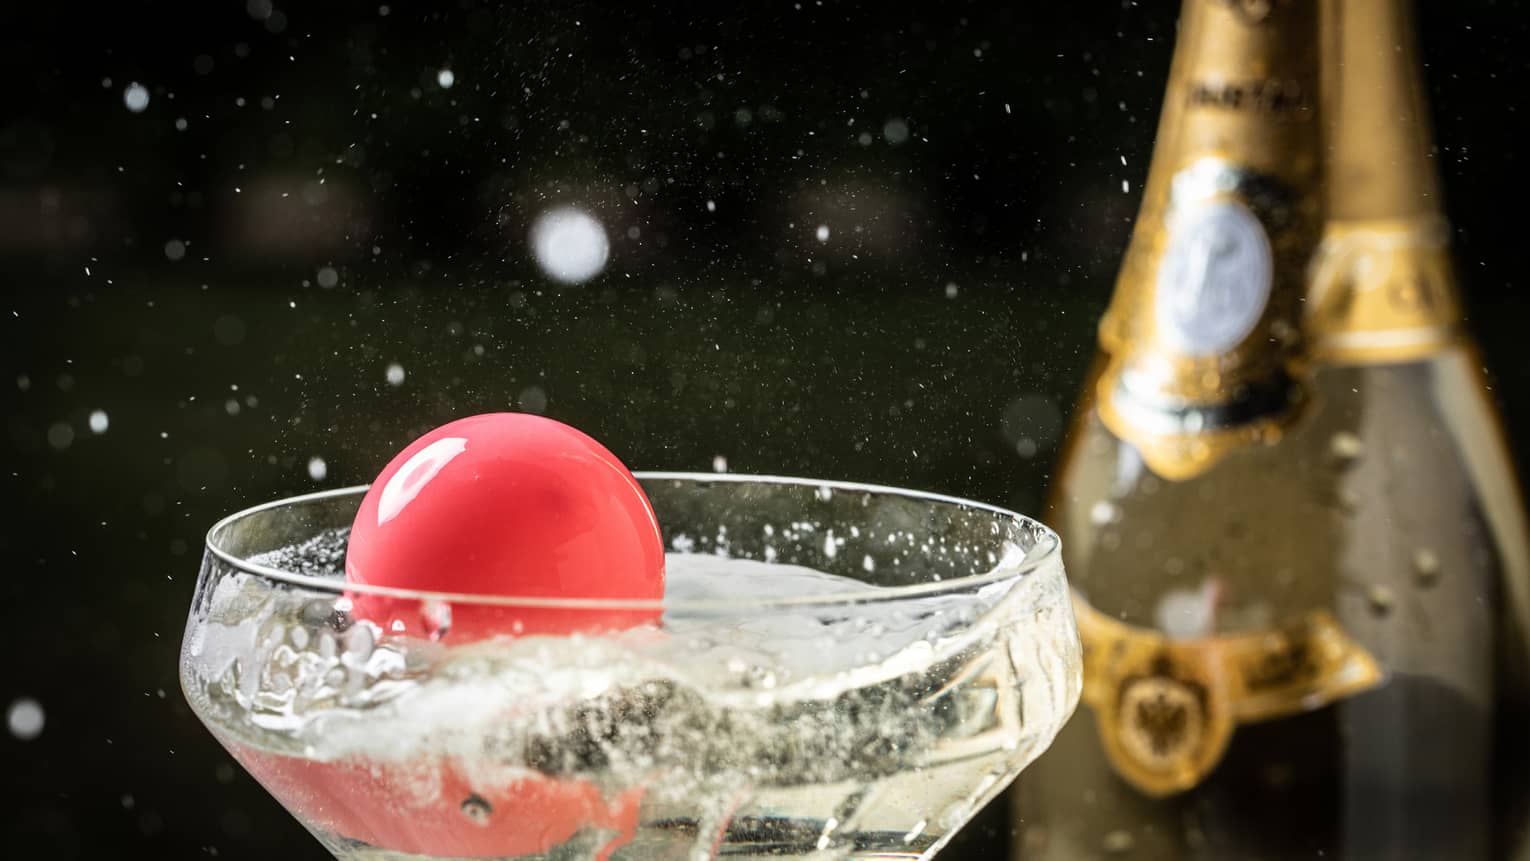 A close up of a pink ball floating in a glass of champagne